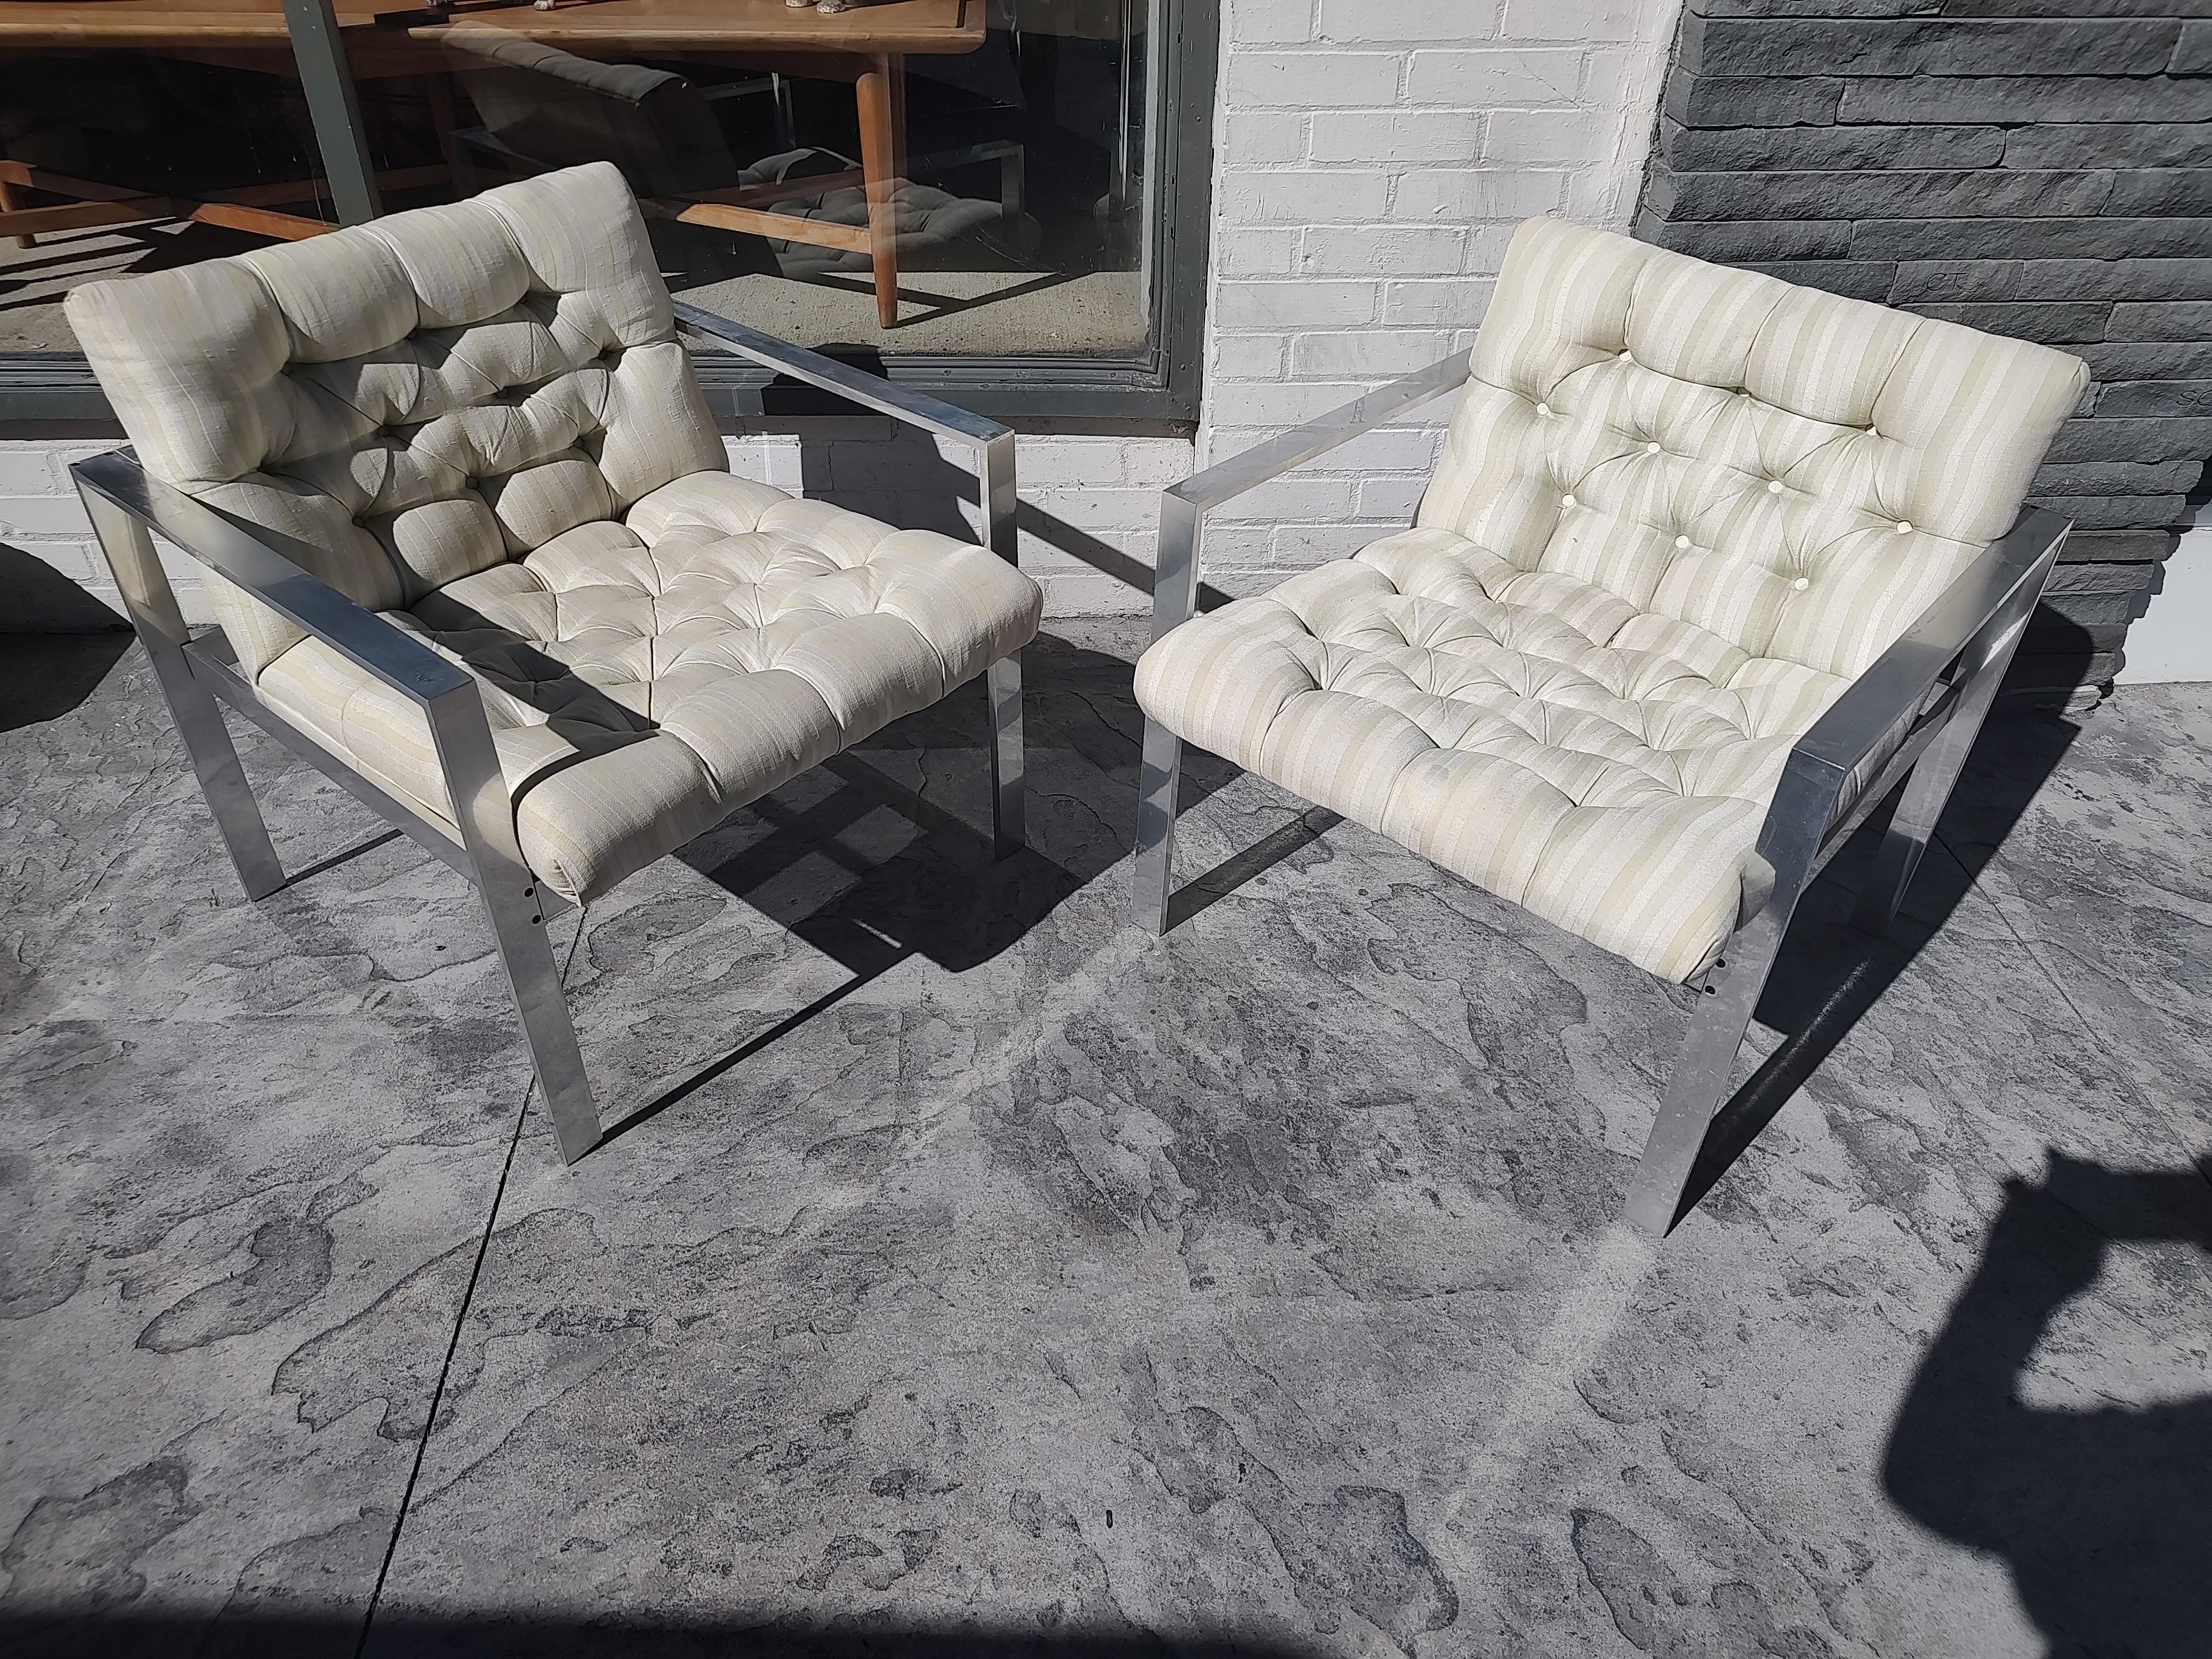 Pair of Mid-Century Modern Tufted Aluminum Lounge Chairs by Harvey Probber For Sale 6